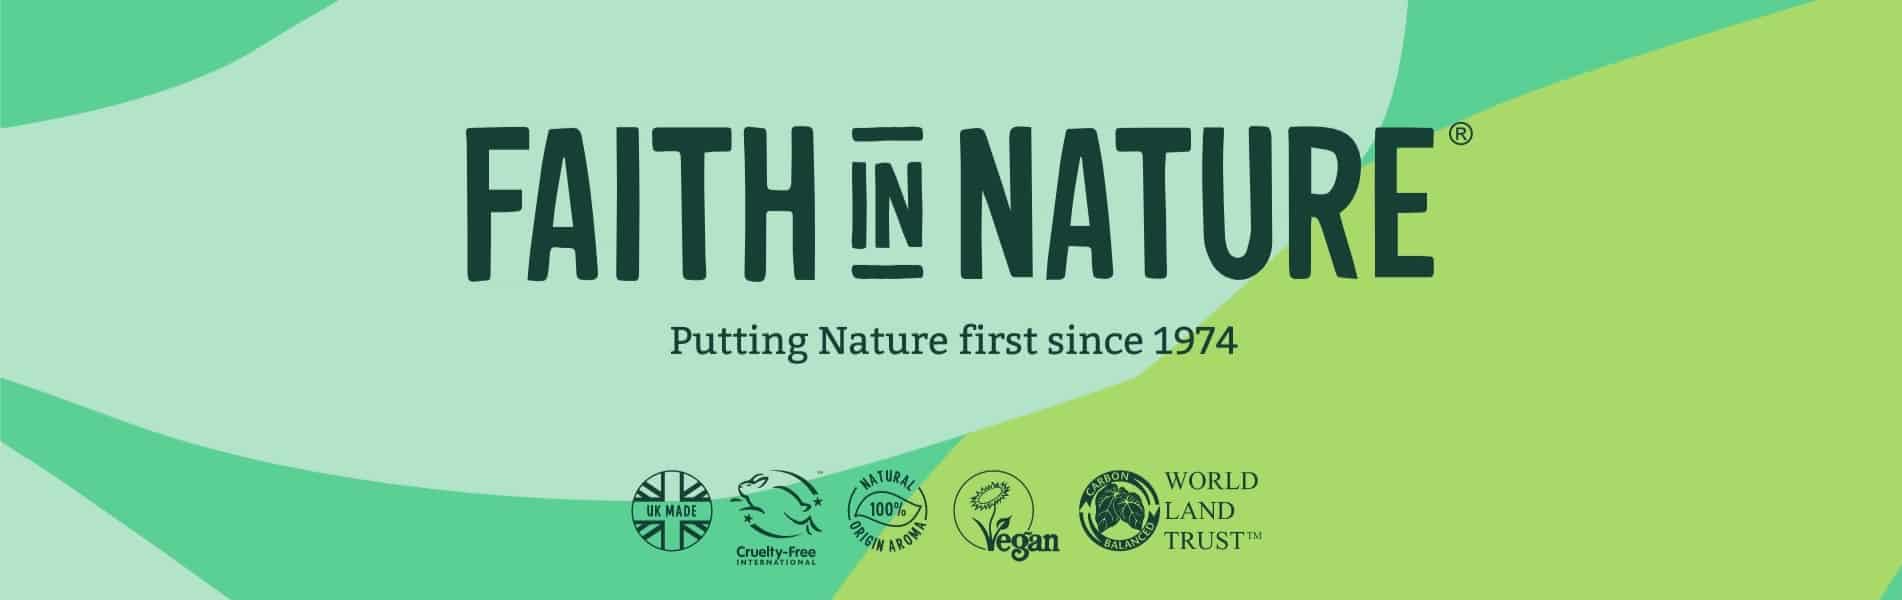 Faith In Nature Charters Course For Sustainable Growth With SAP